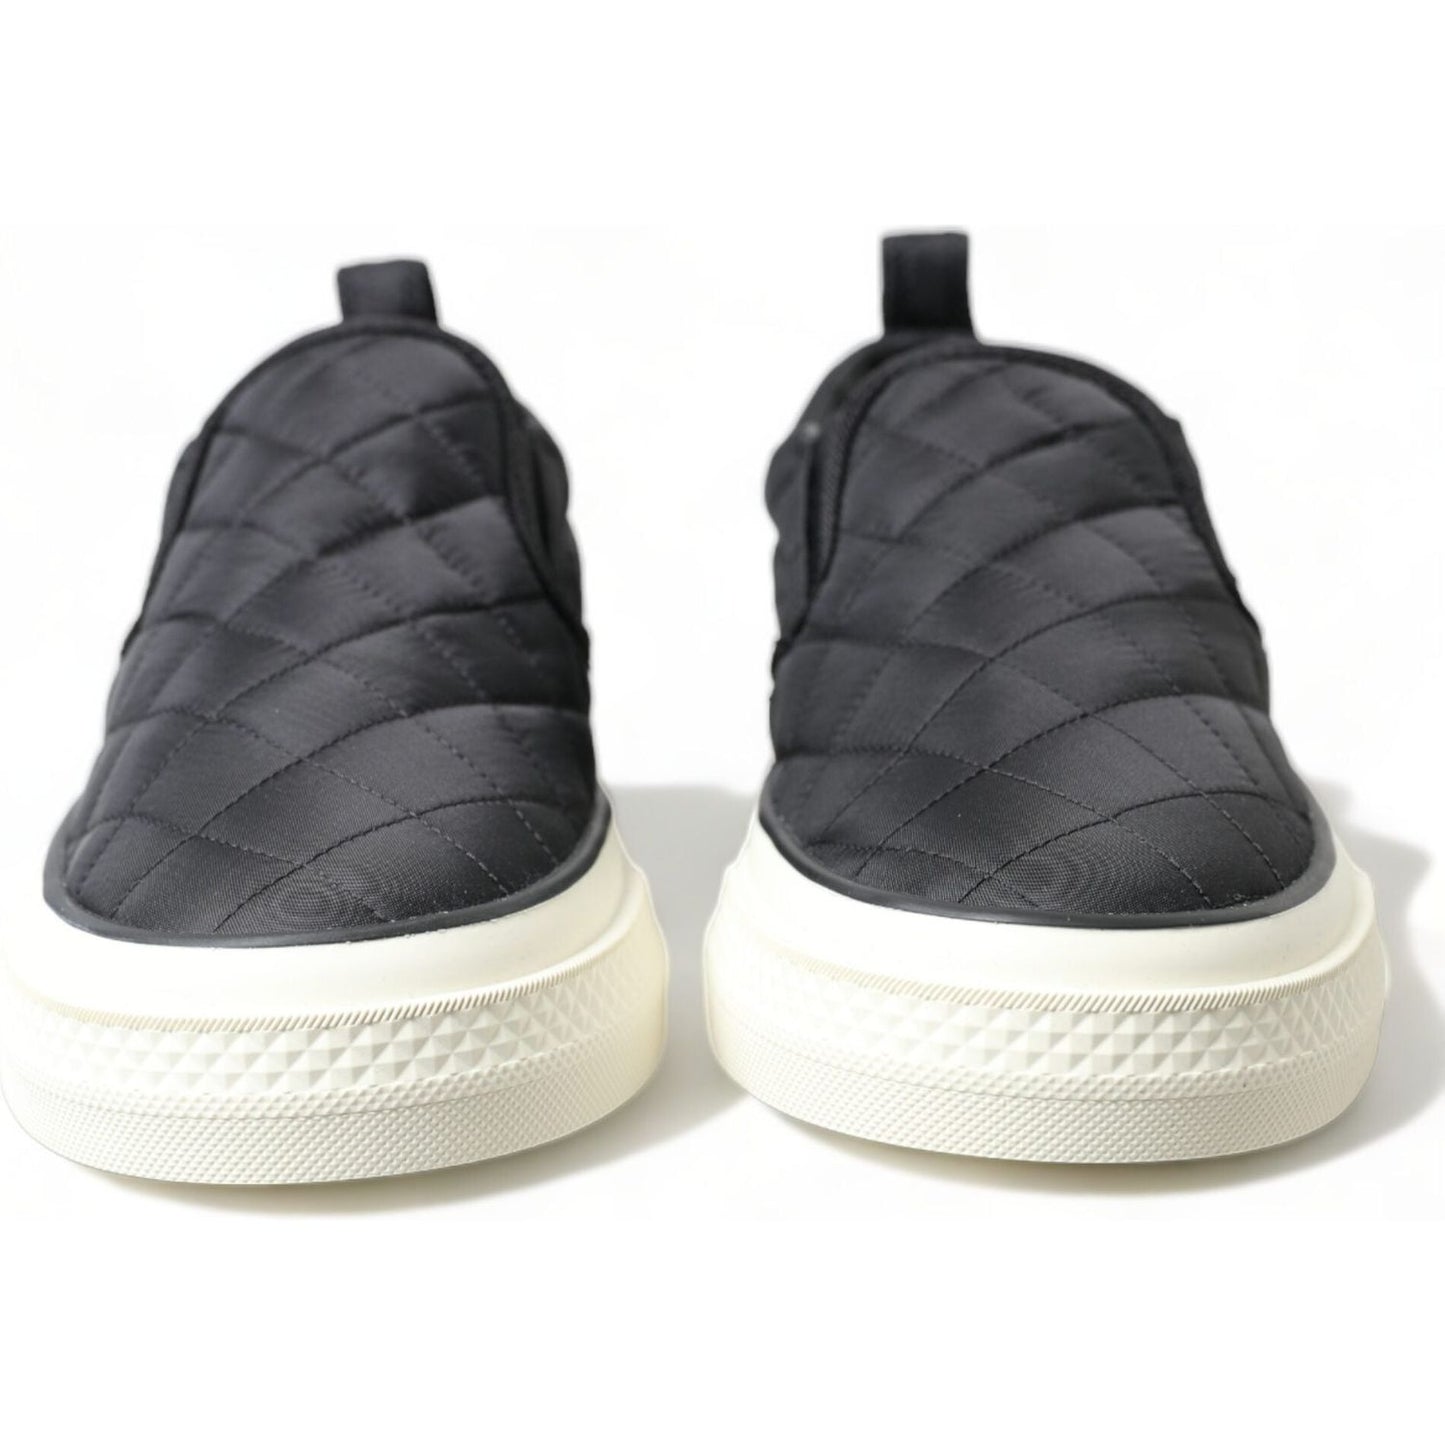 Dolce & Gabbana Elegant Quilted Black Canvas Sneakers black-quilted-slip-on-low-top-sneakers-shoes